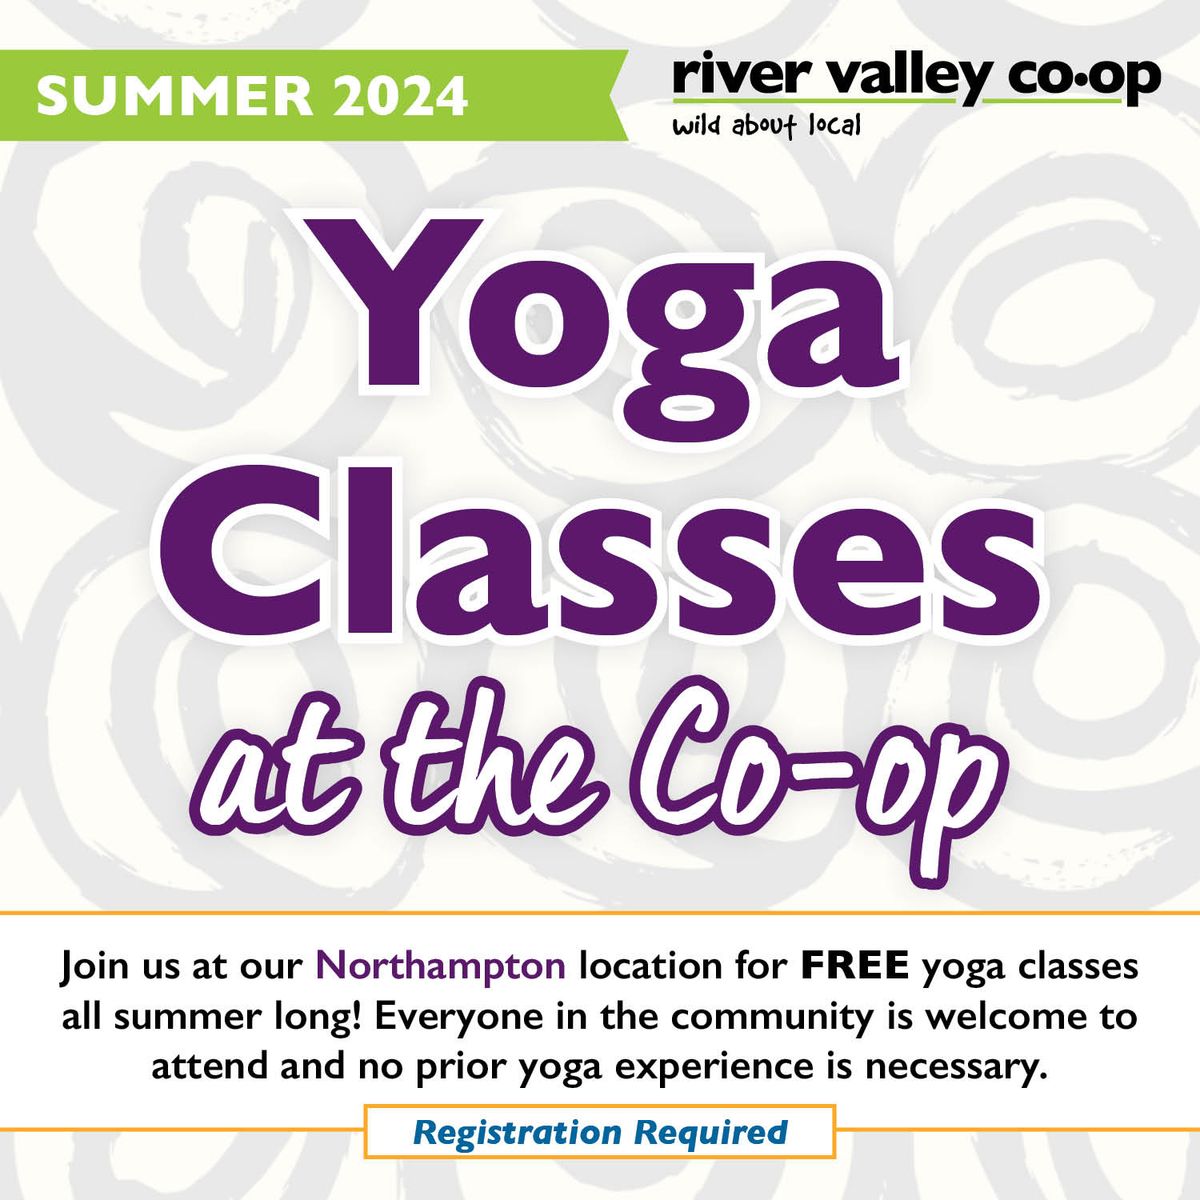 FREE Yoga Classes at the Co-op!